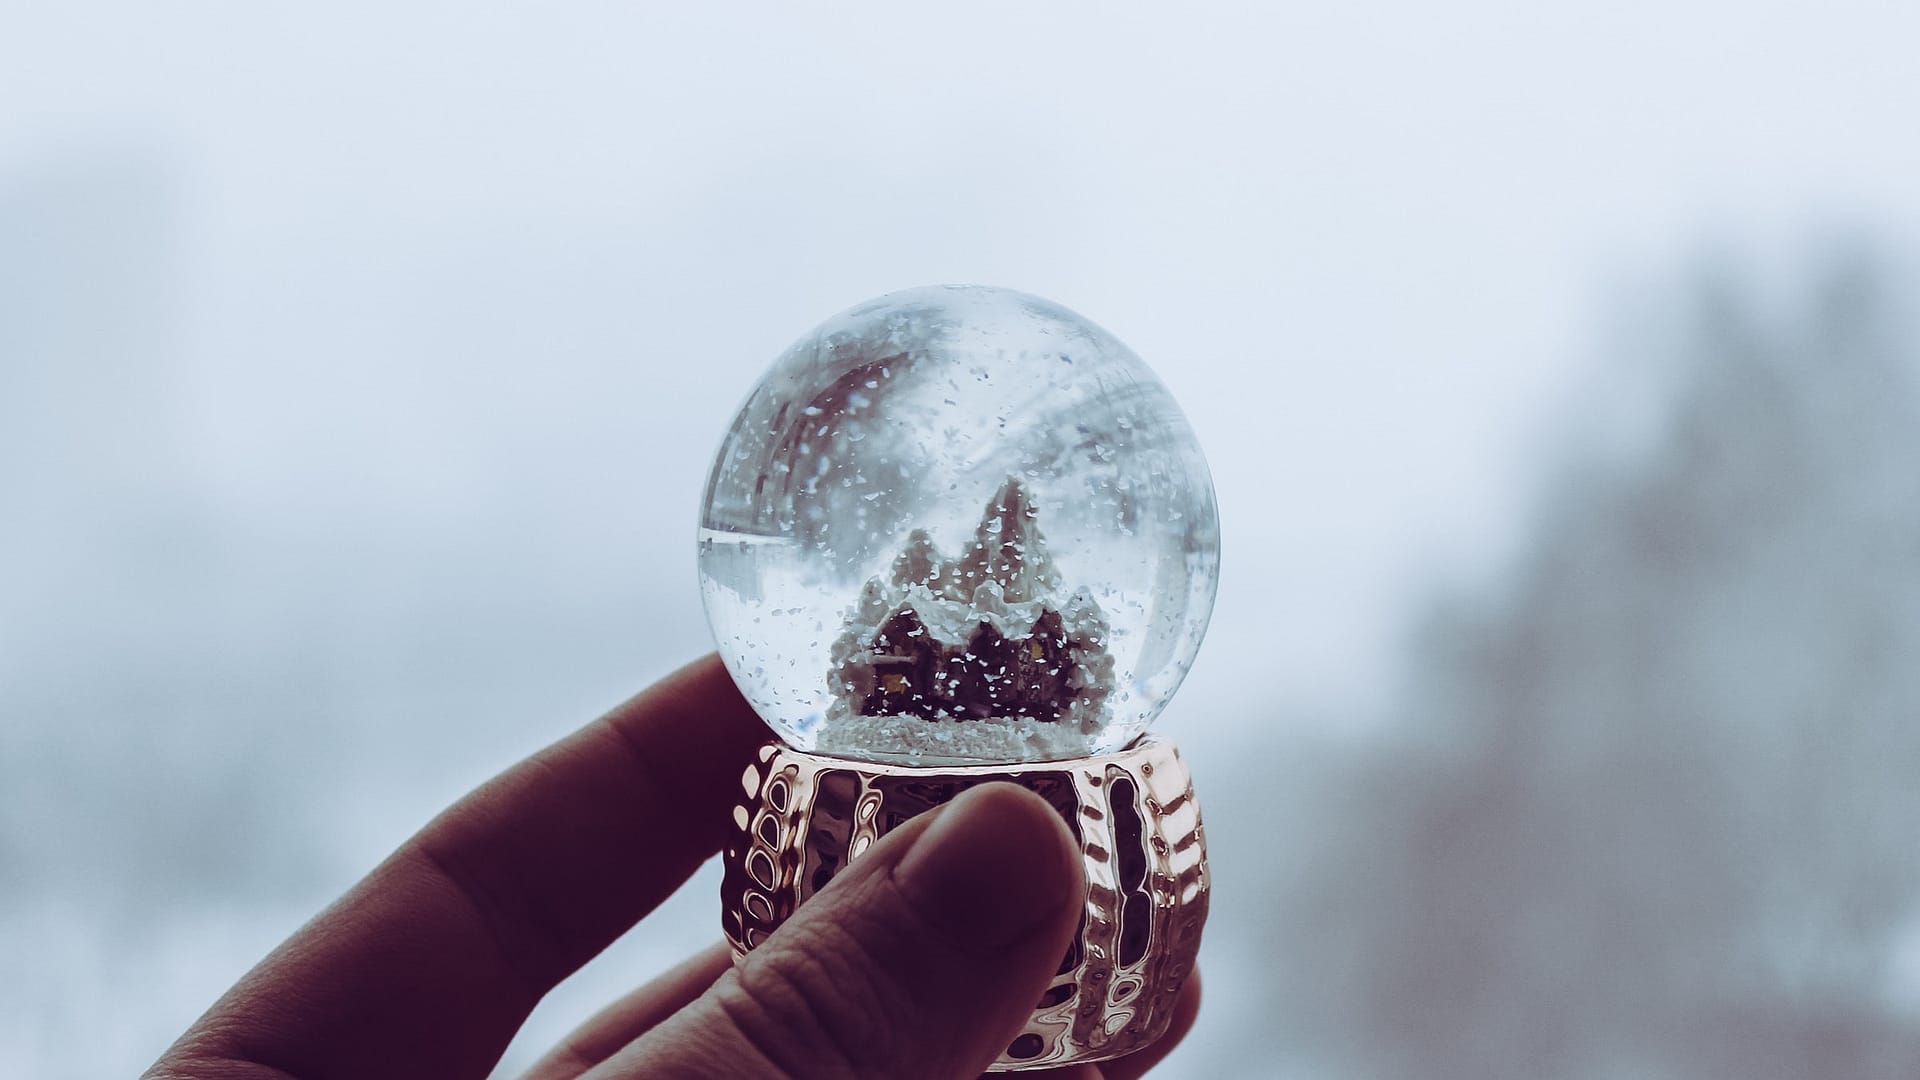 Image: A person holding a snow globe